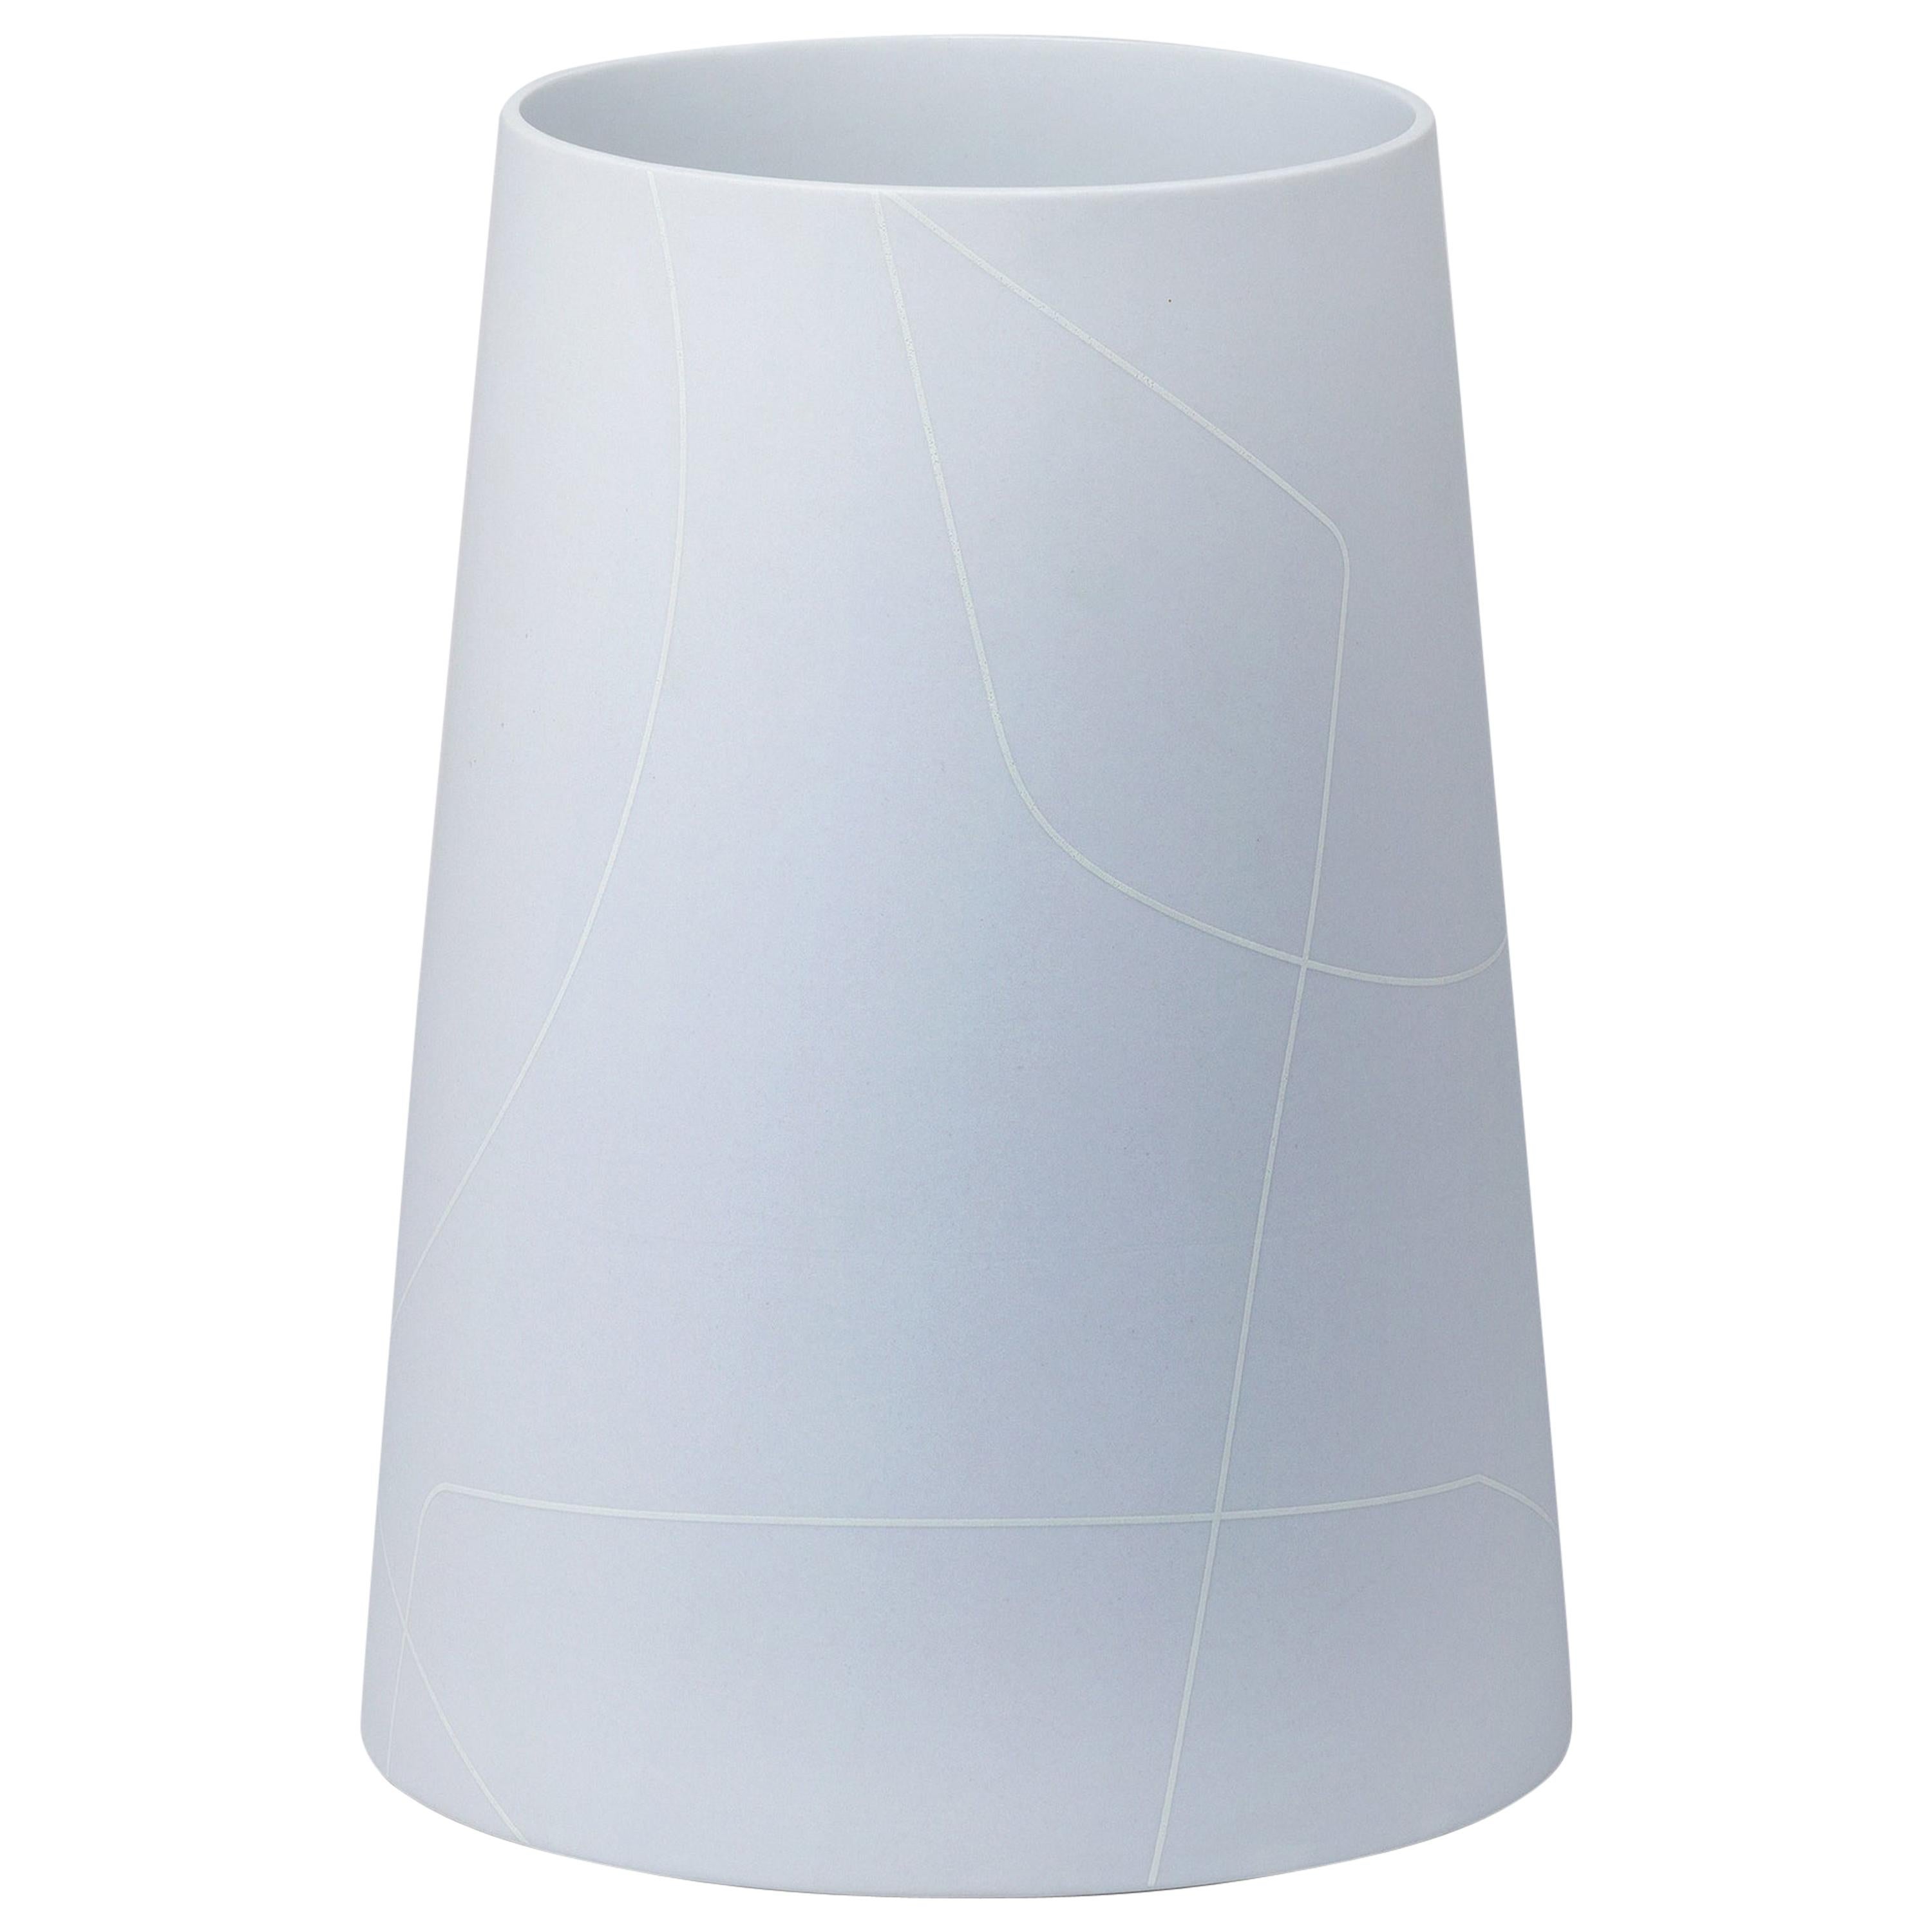 Tall Light Grey Conical Ceramic Vase with Graphic Line Pattern